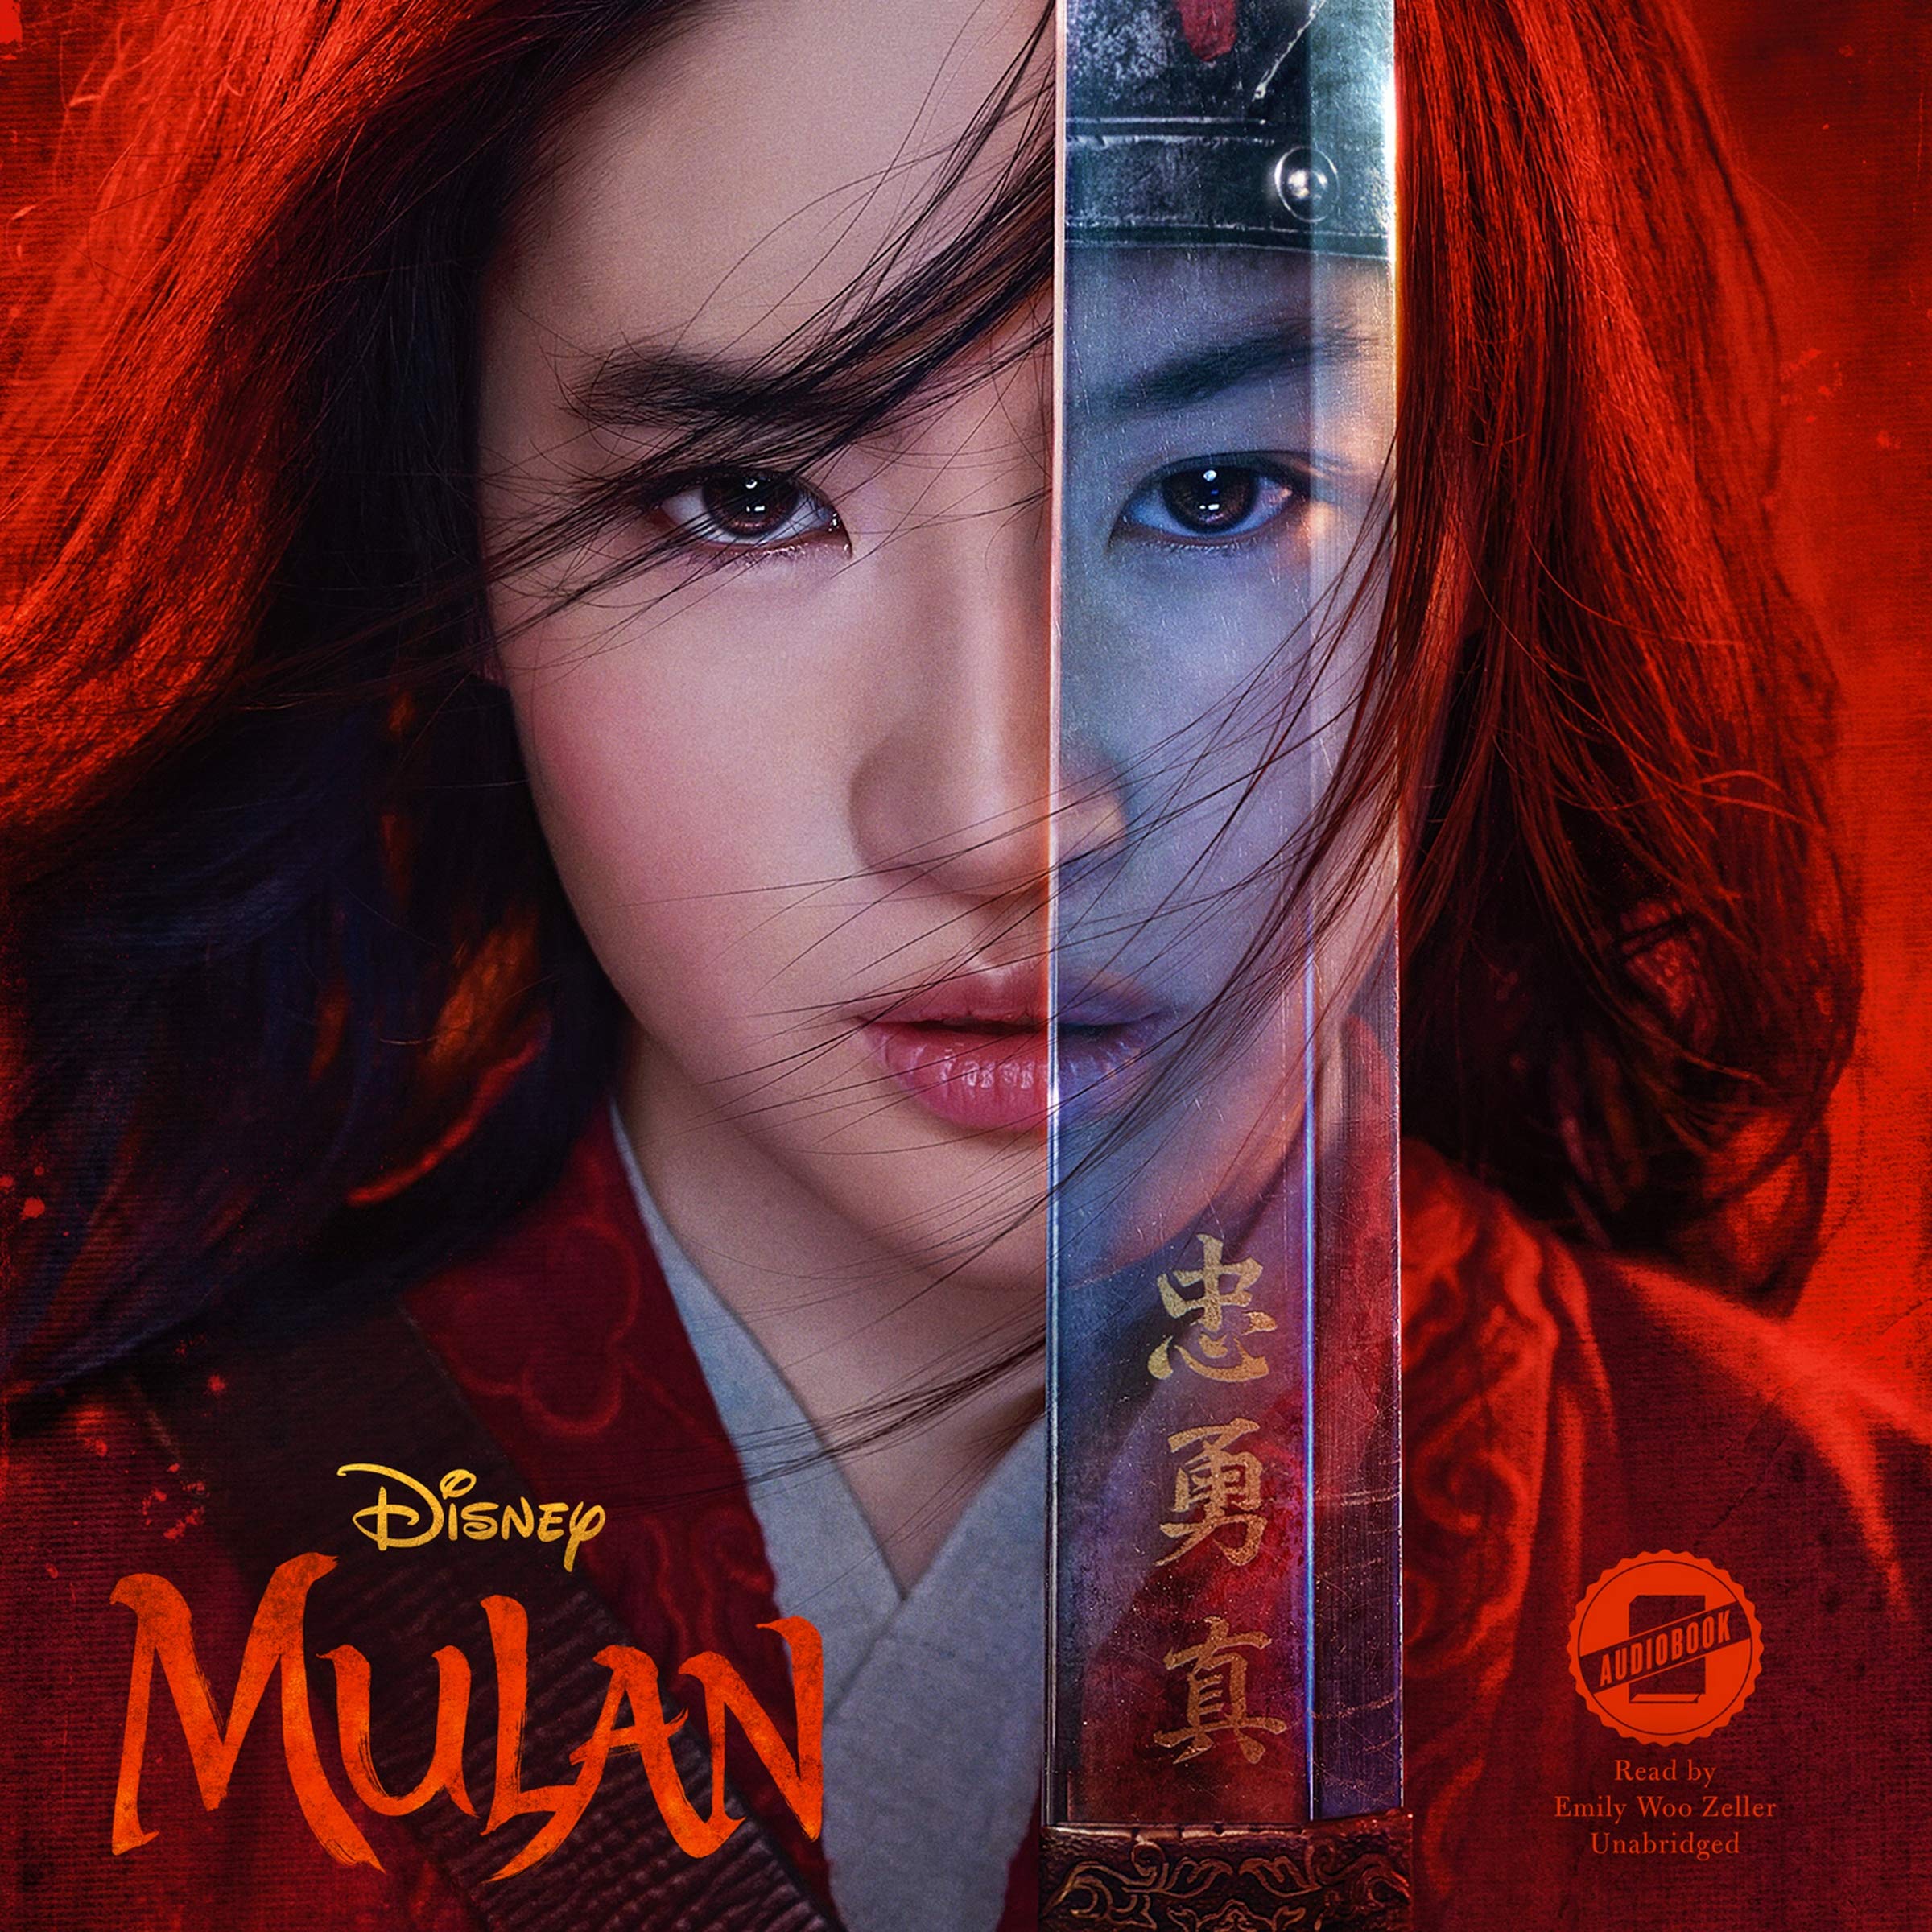 Image for "Mulan Before the Sword"